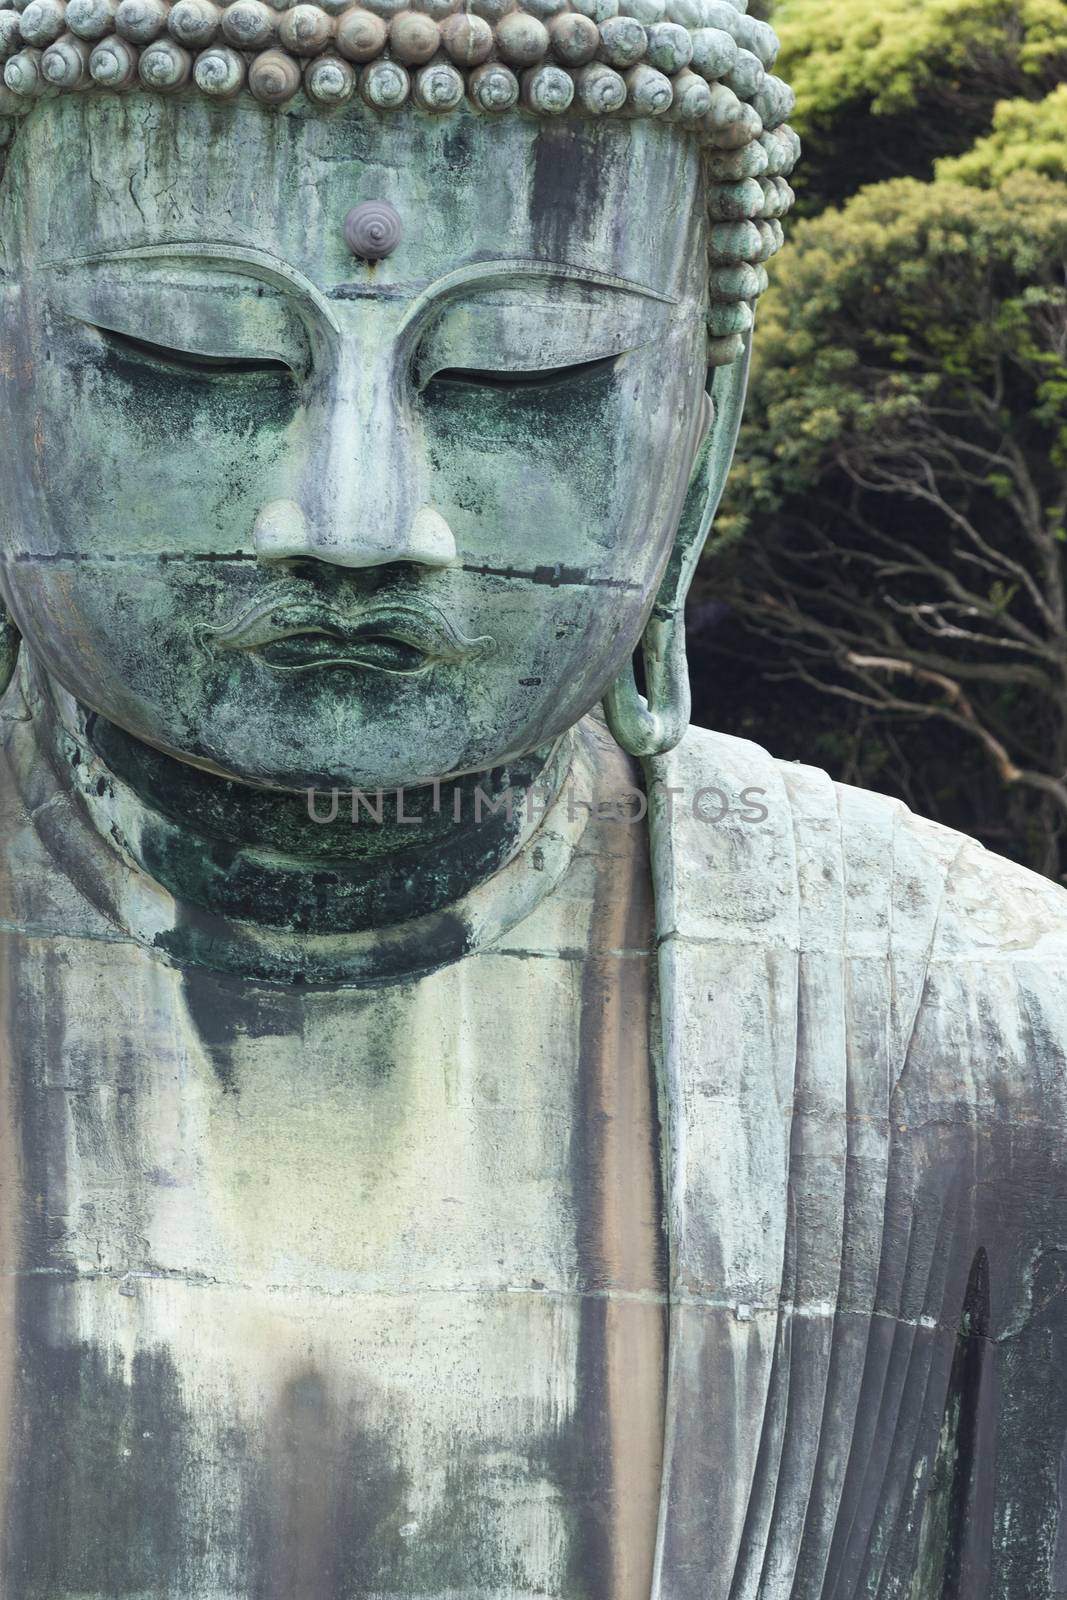 The Great Buddha (Daibutsu) on the grounds of Kotokuin Temple in by mariusz_prusaczyk